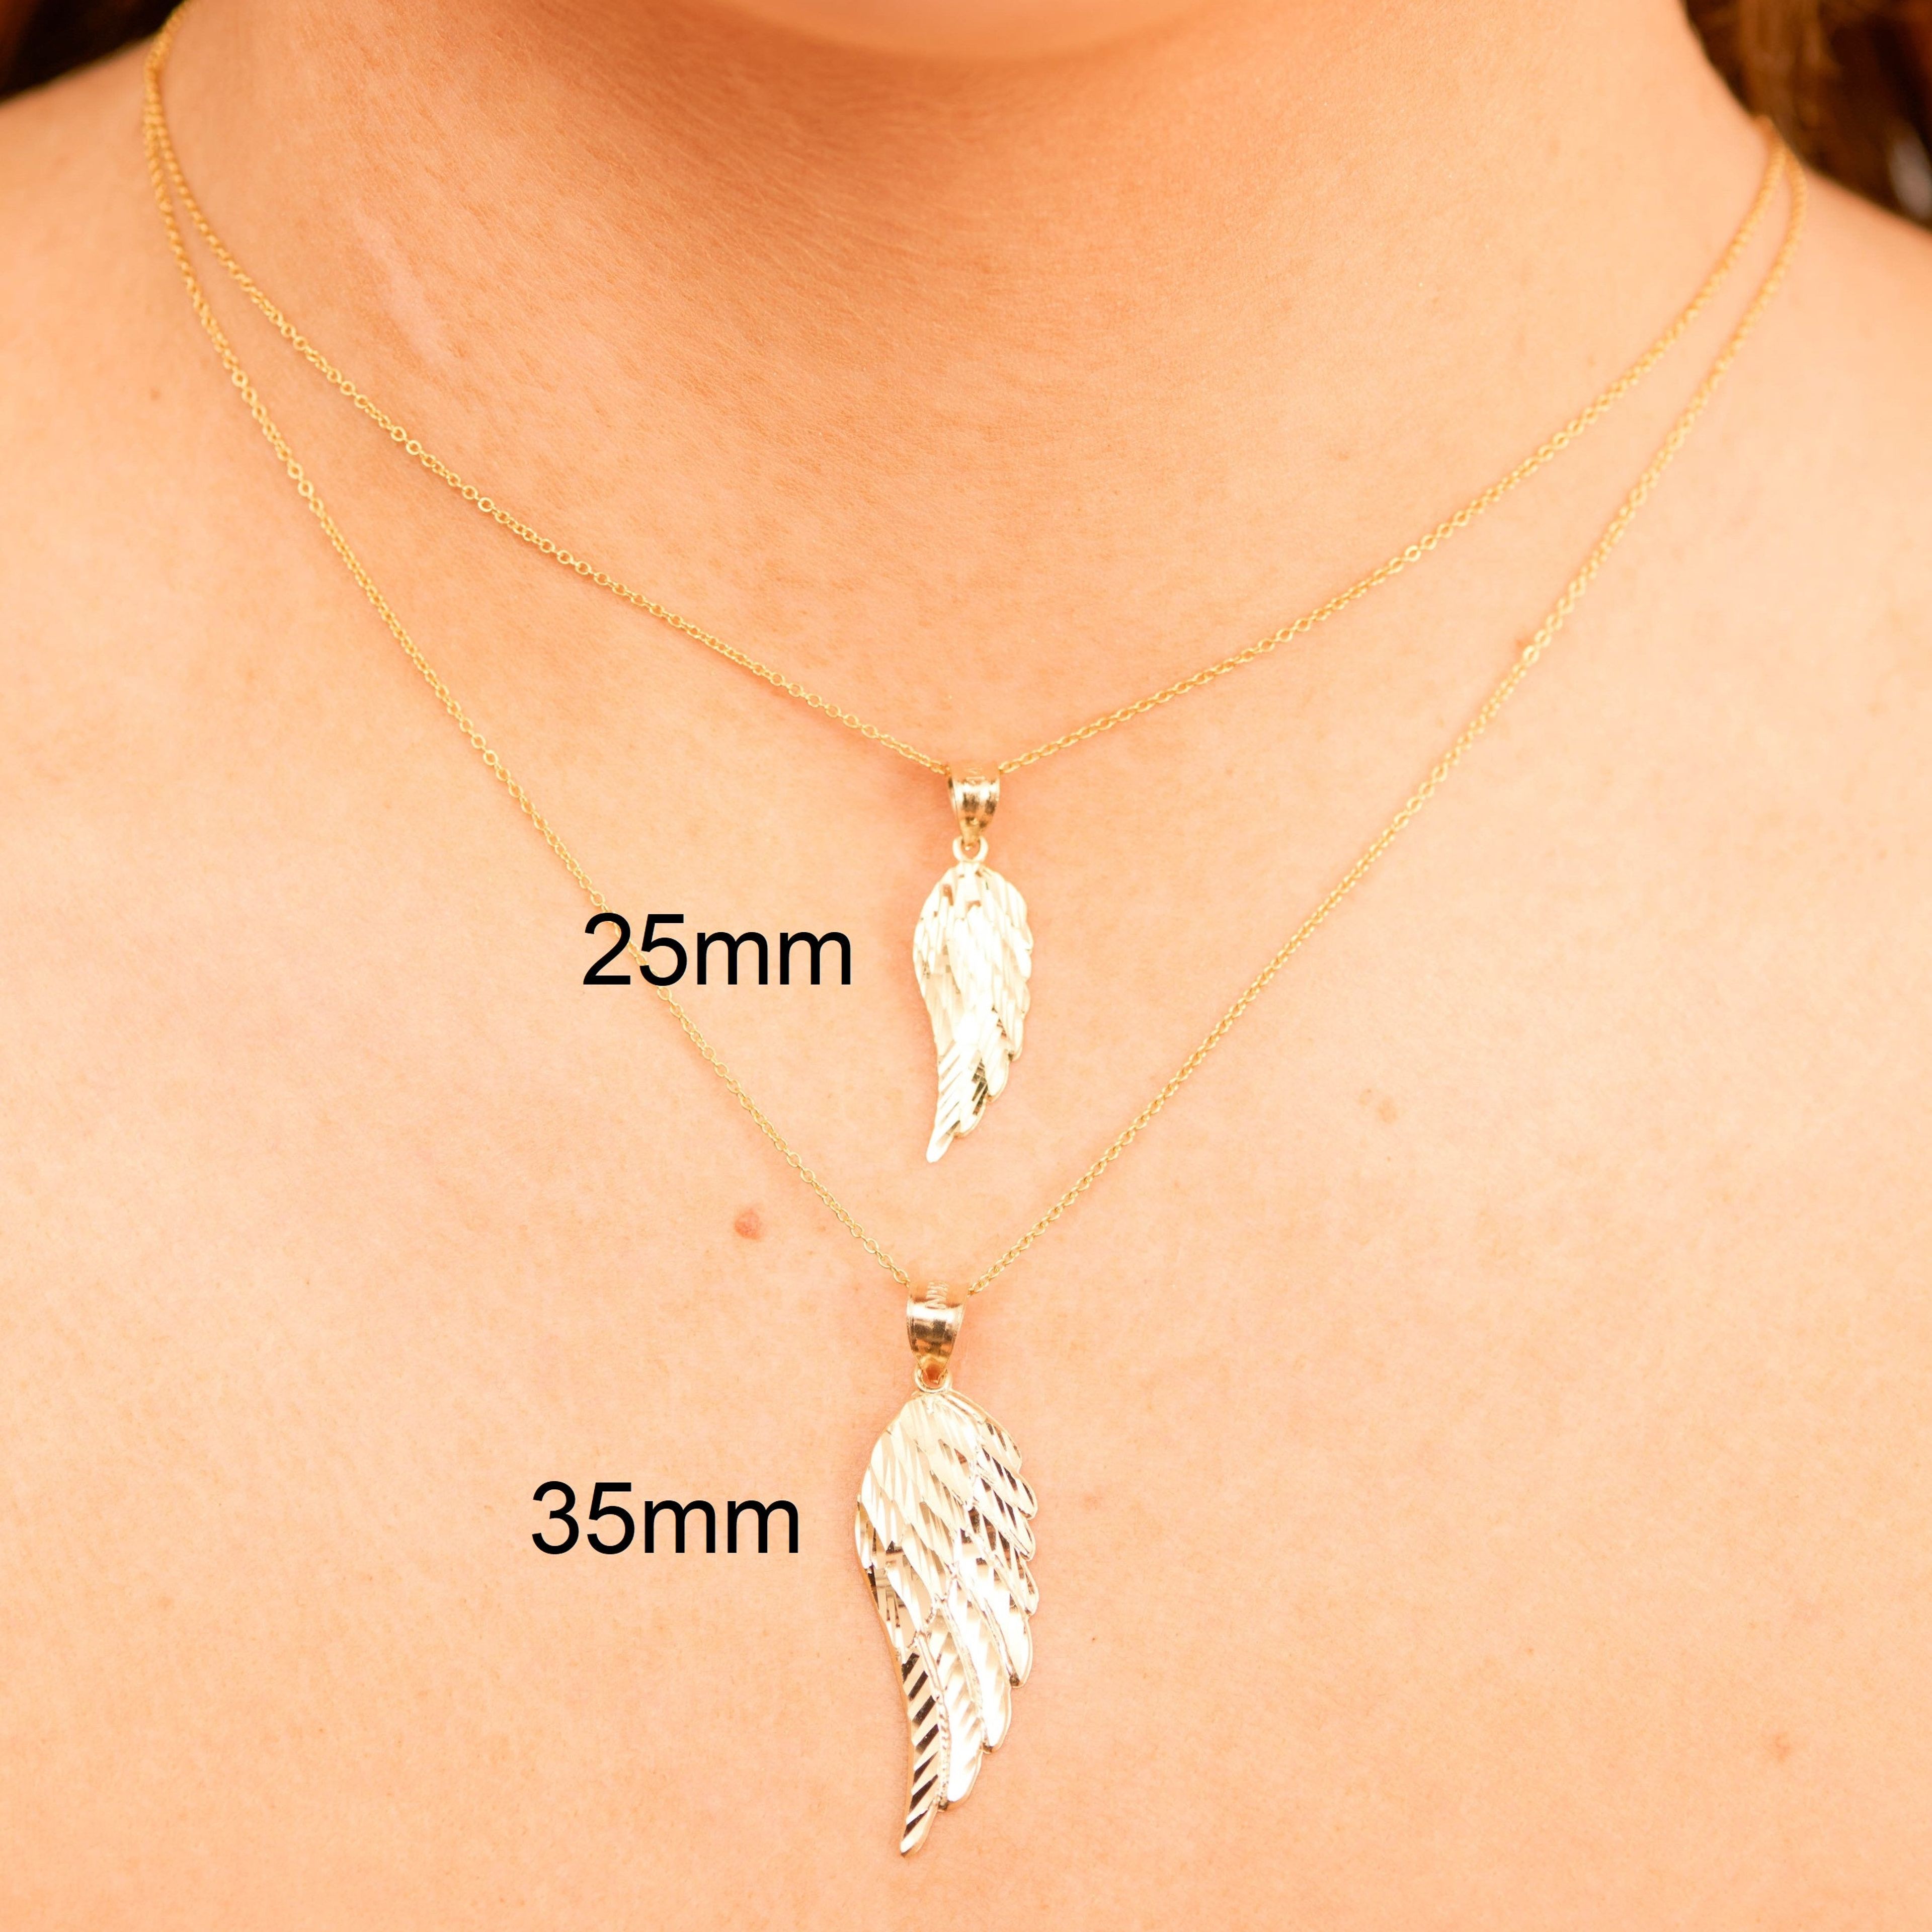 14k Gold Wing Charm Necklace